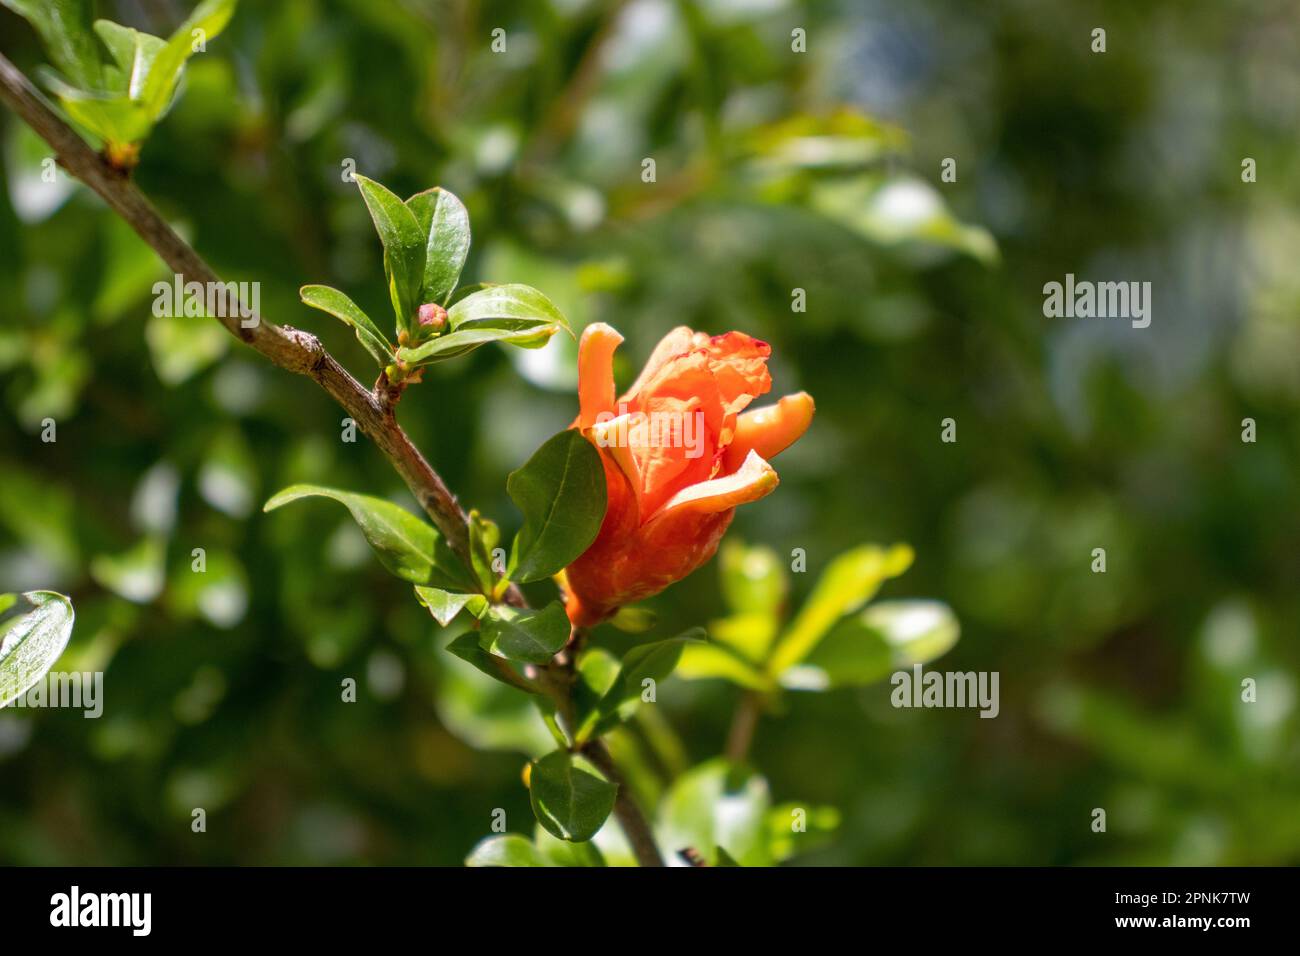 single tropical orange red flower on a branch with a natural green woodland background Stock Photo